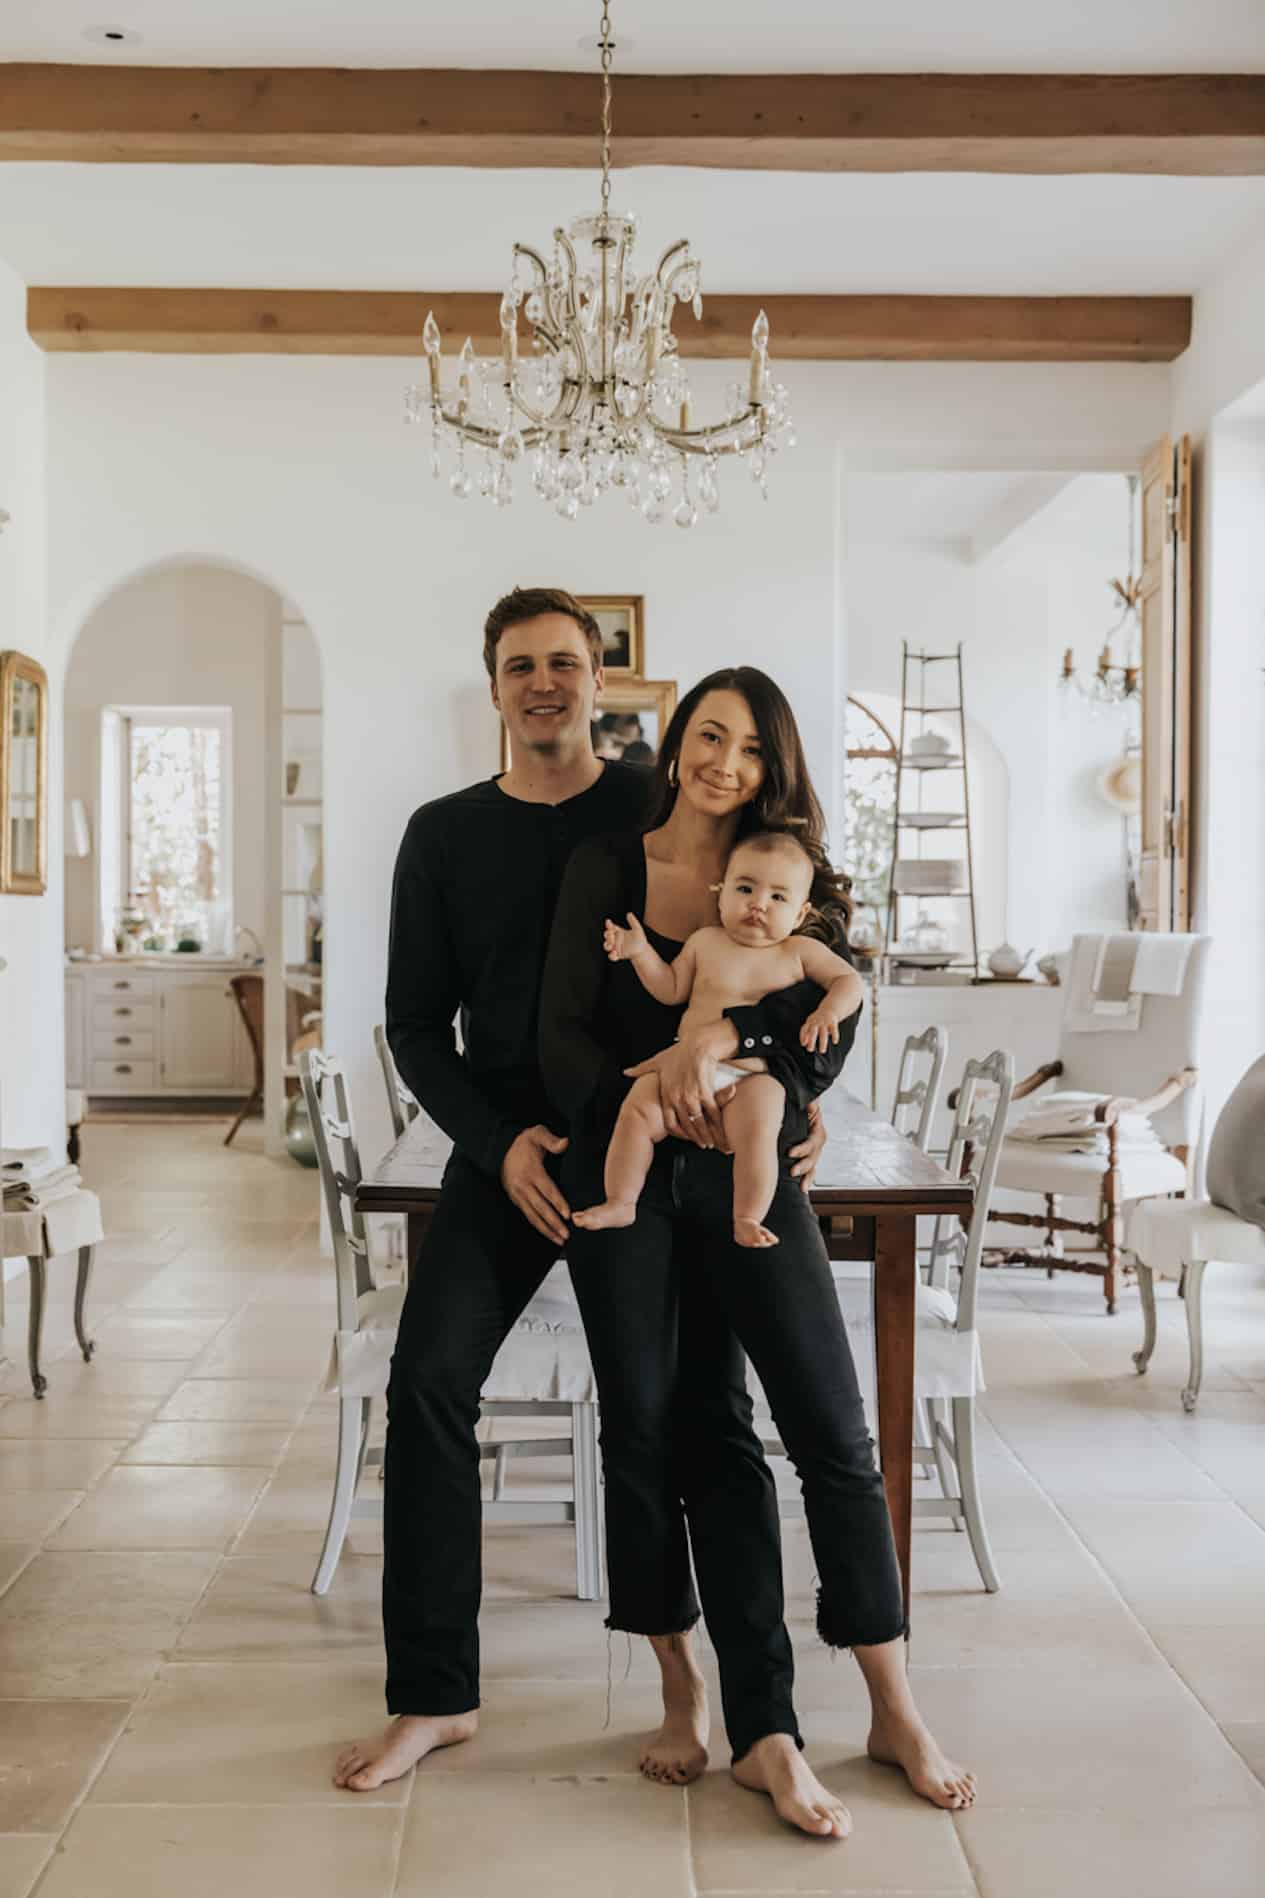 image of a woman and man wearing all black outfits sitting casually in their home holding a baby in a diaper in their arms